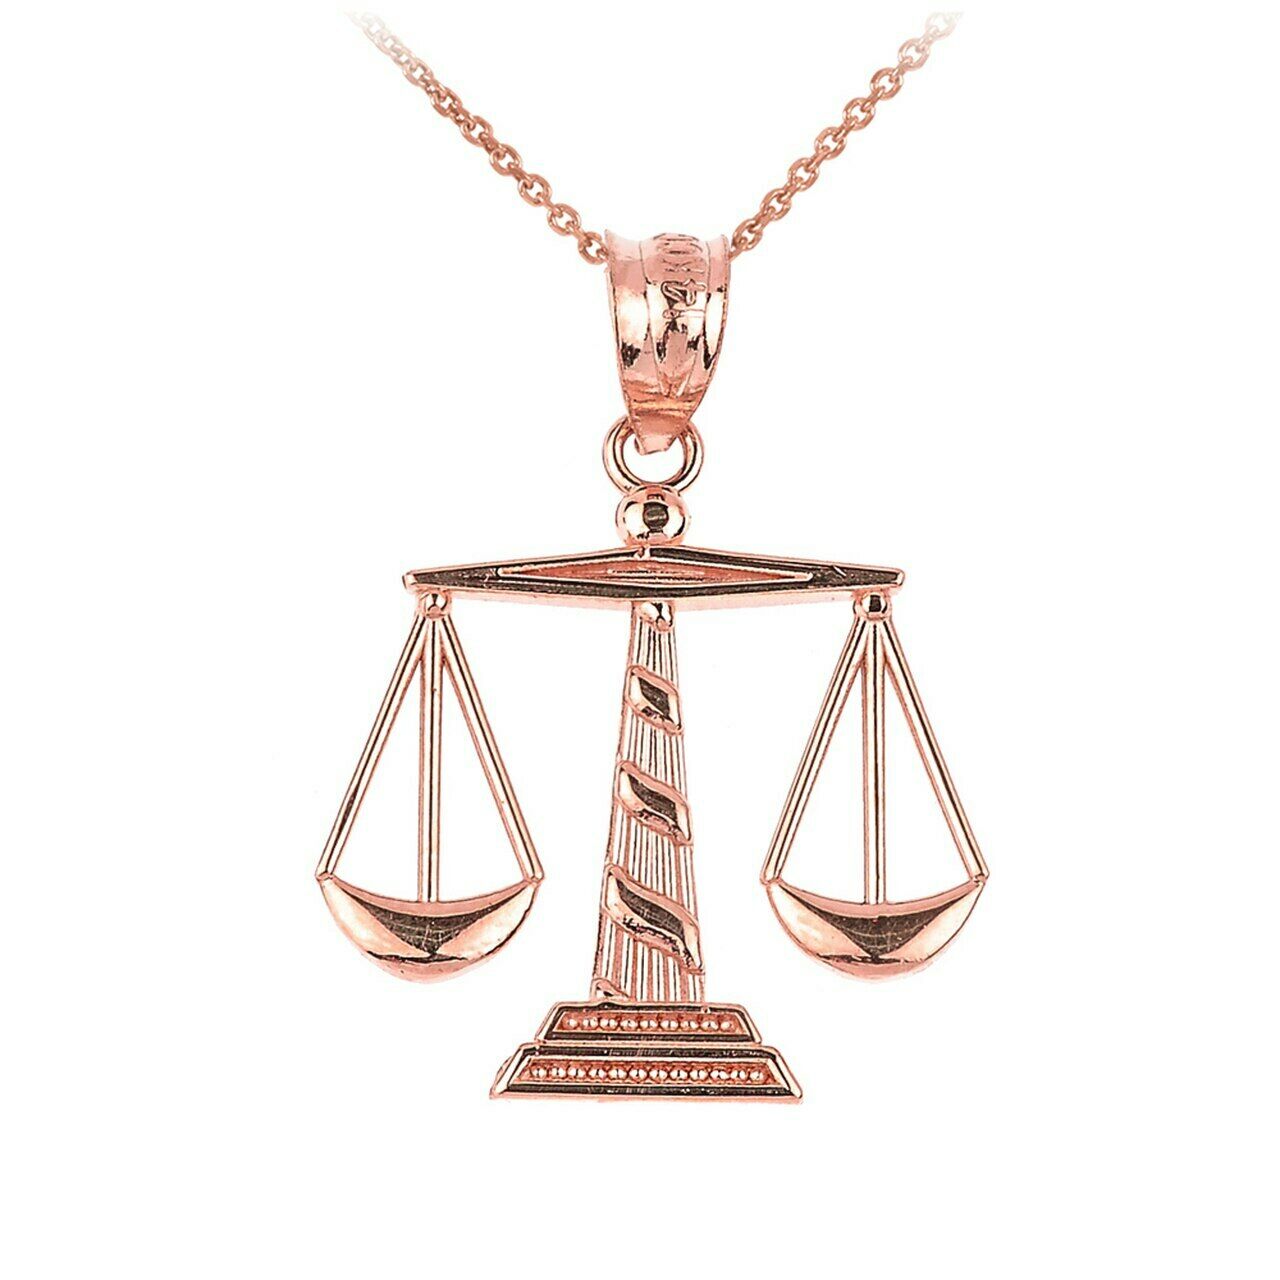 Solid Rose 14k Gold Scales of Justice Pendant Necklace